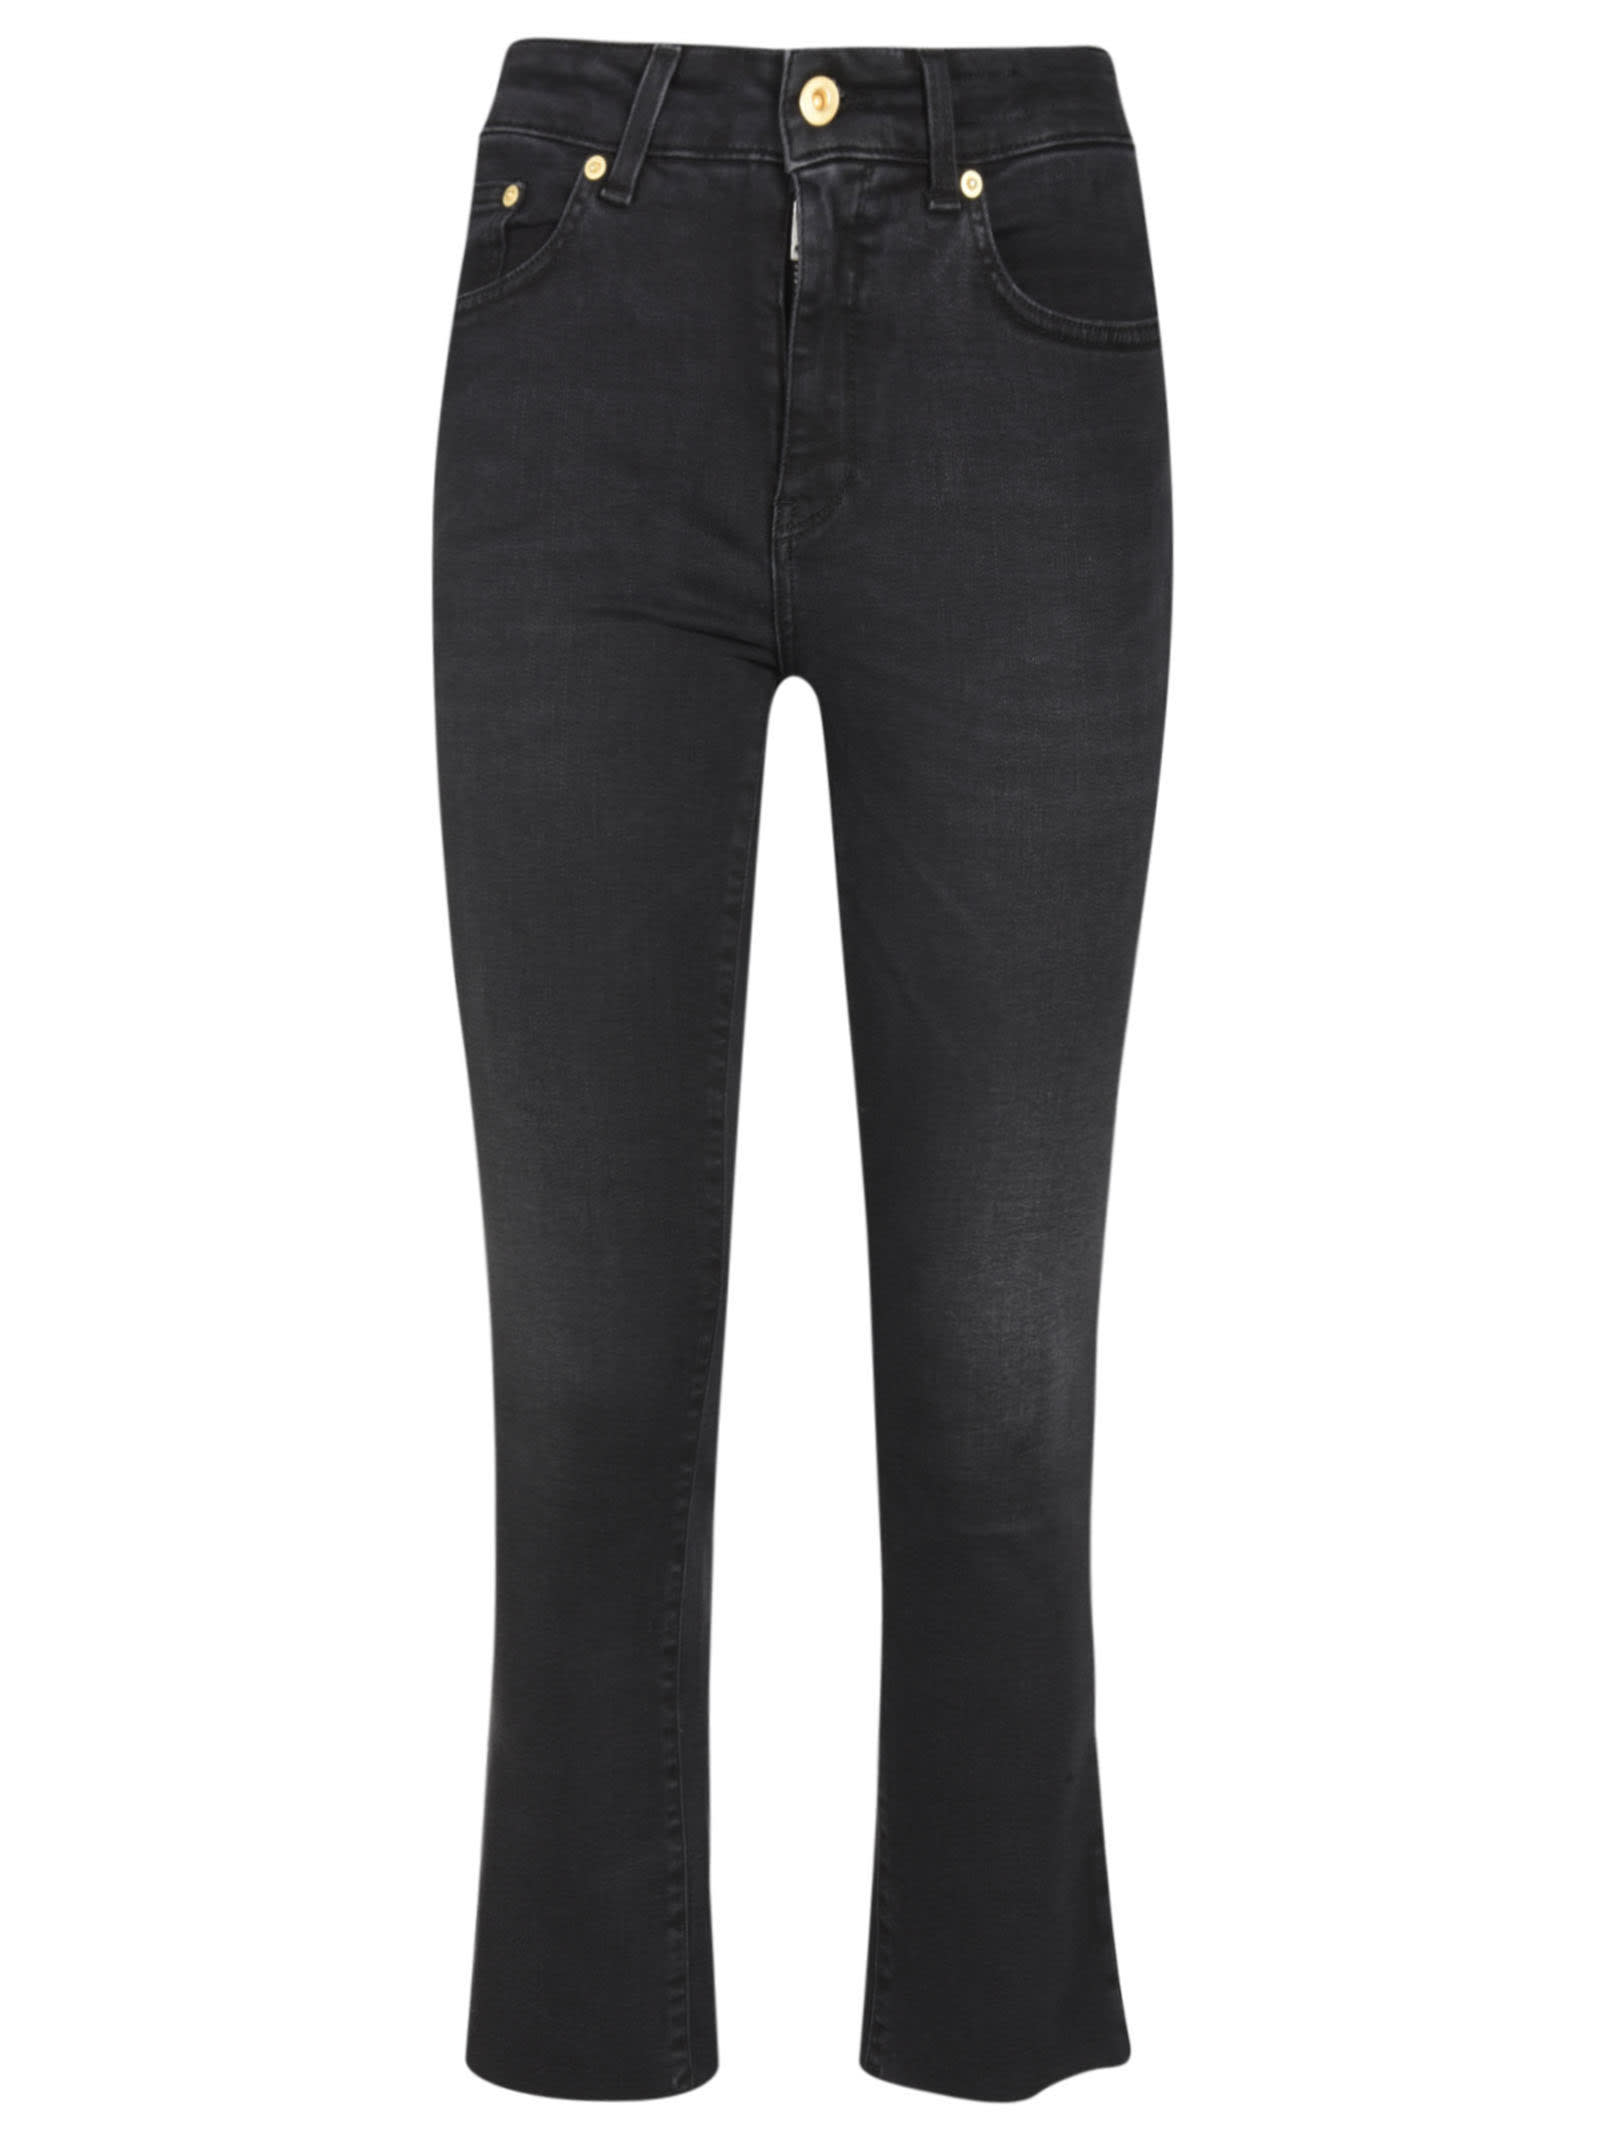 Department 5 Skinny Fit Jeans